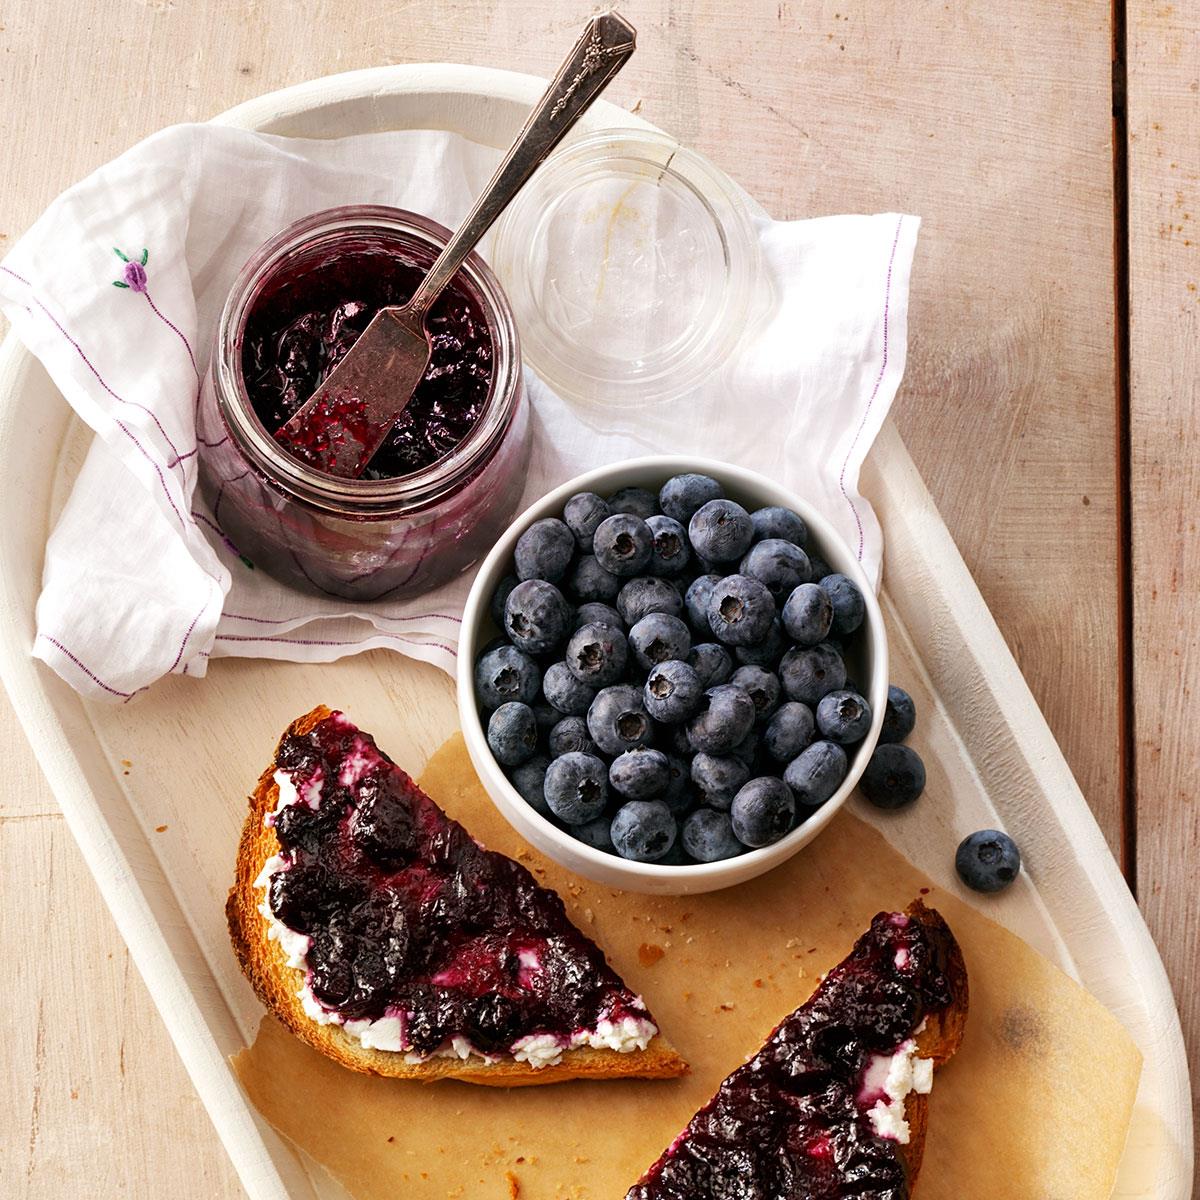 SMUCKER’S BLUEBERRY PRESERVES - My American Shop